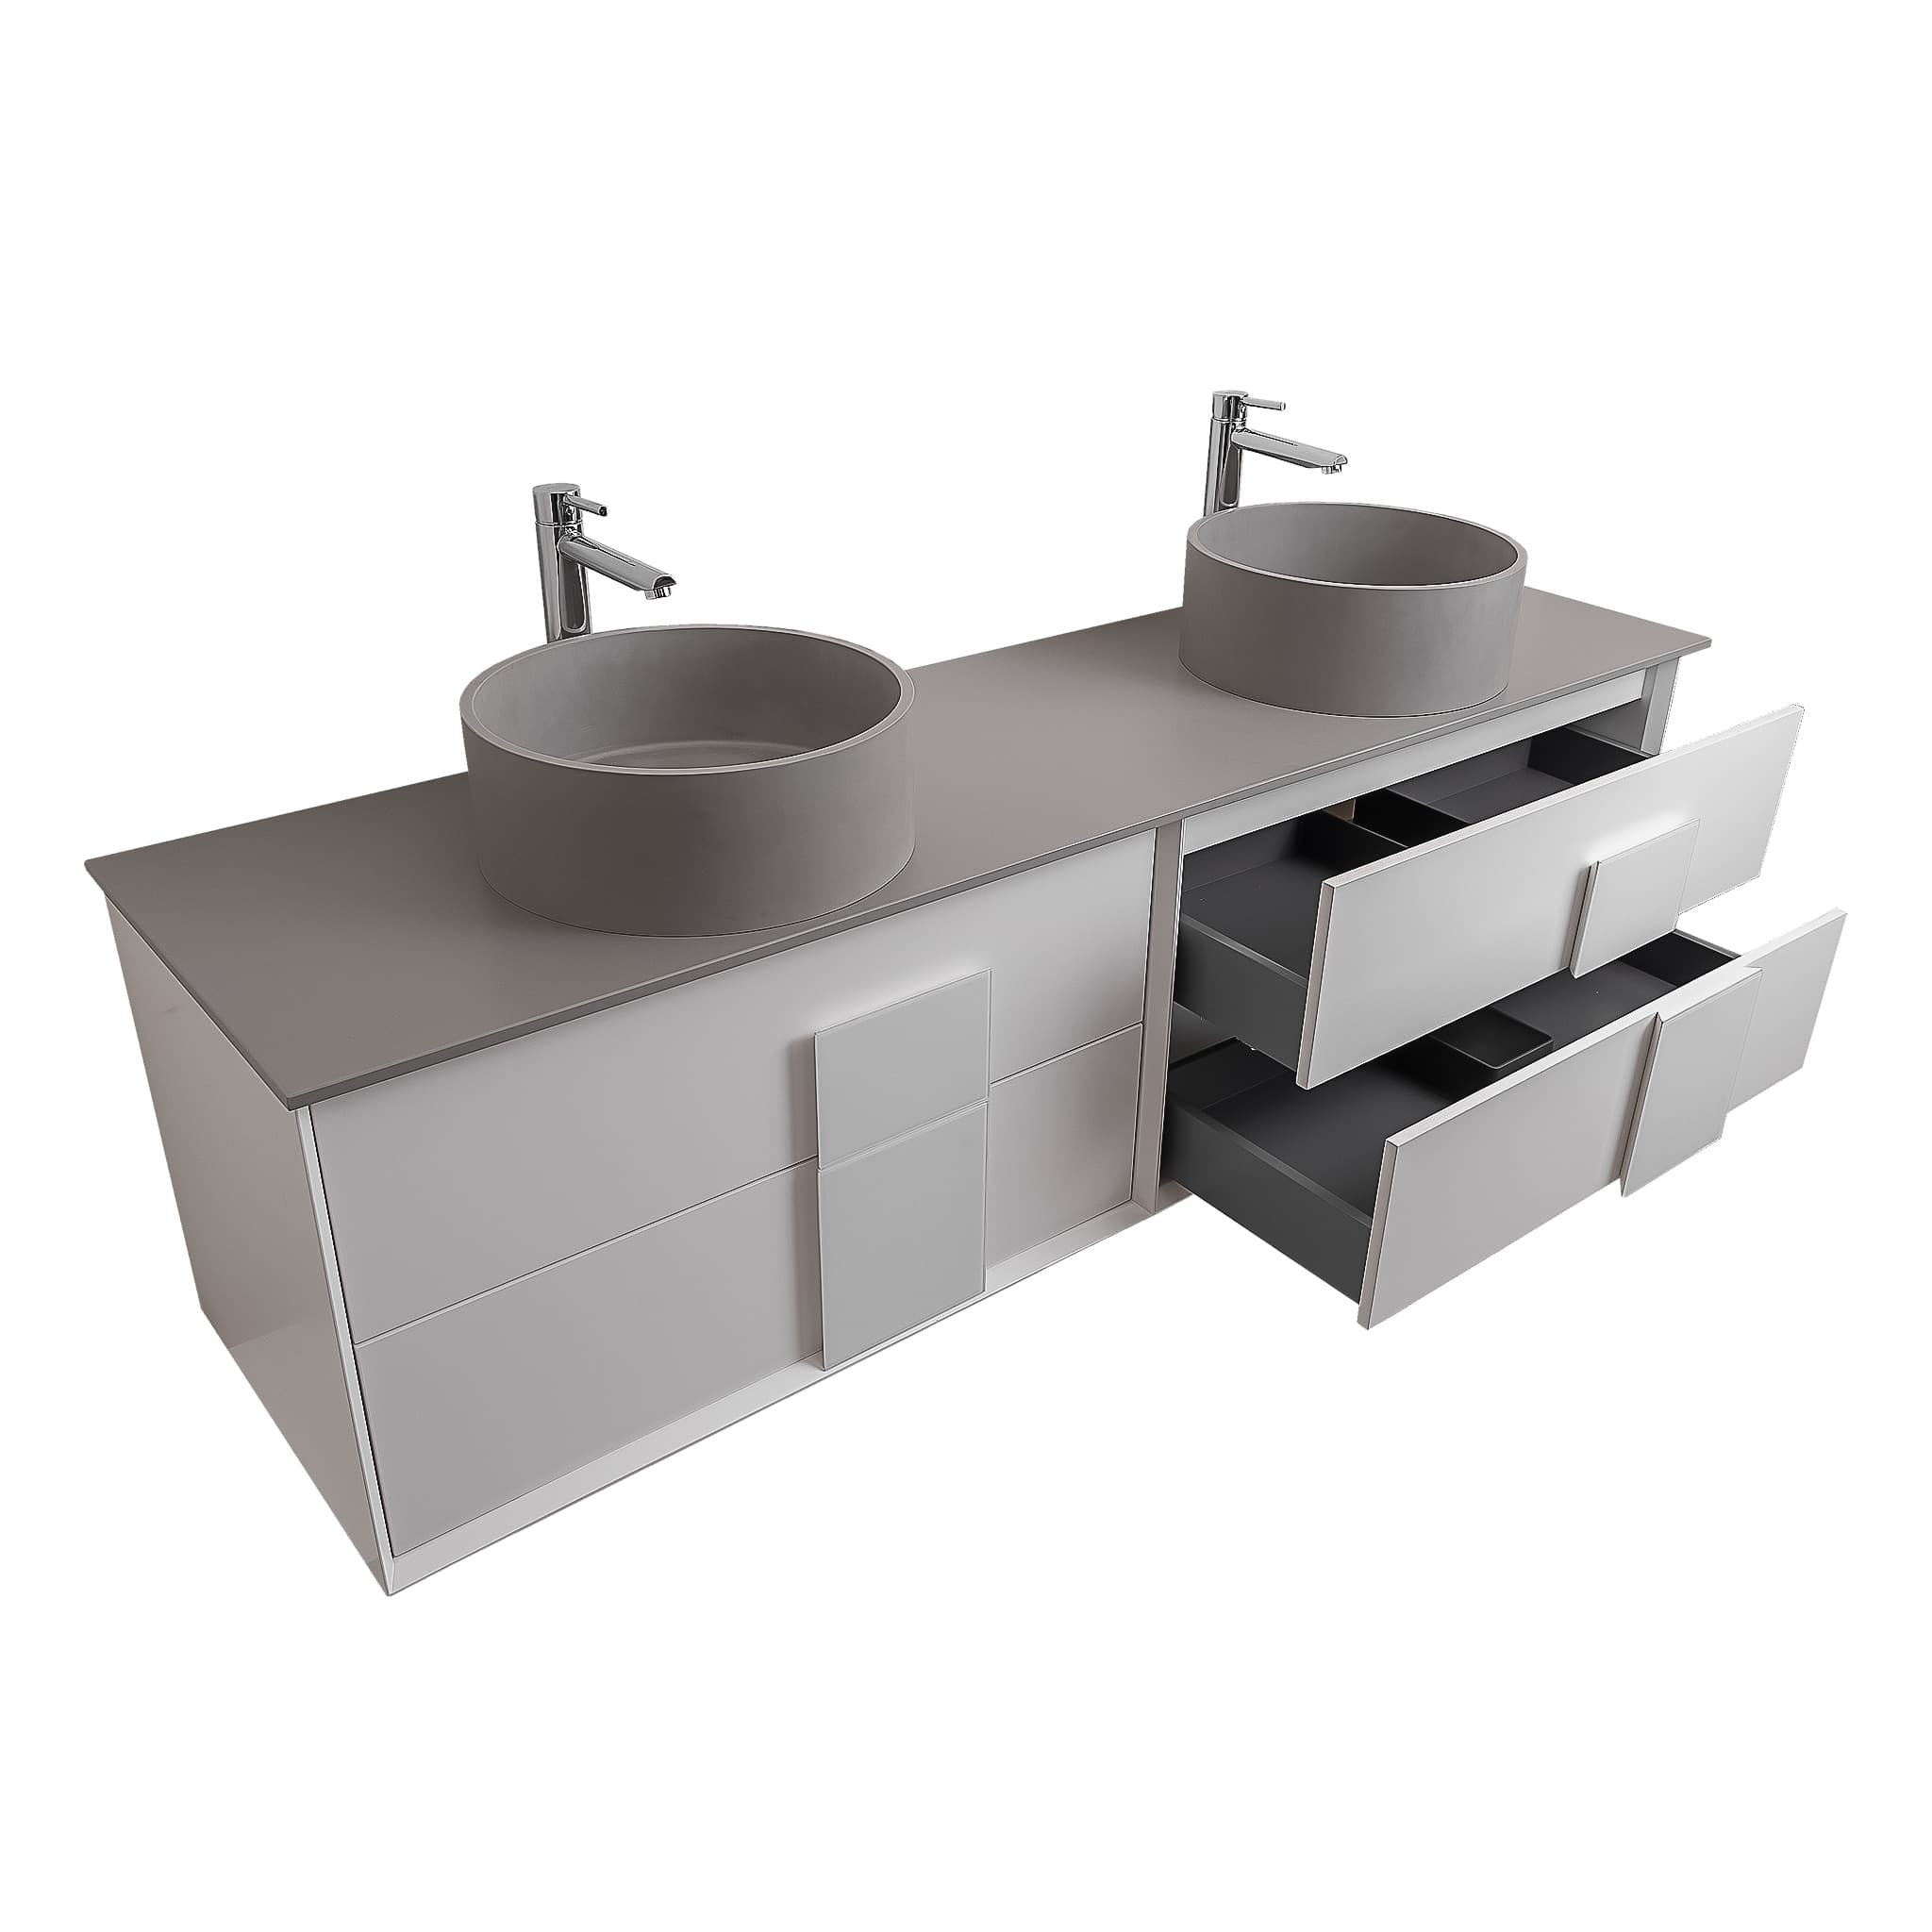 Piazza 63 Matte White With White Handle Cabinet, Solid Surface Flat Grey Counter and Two Round Solid Surface Grey Basin 1386, Wall Mounted Modern Vanity Set